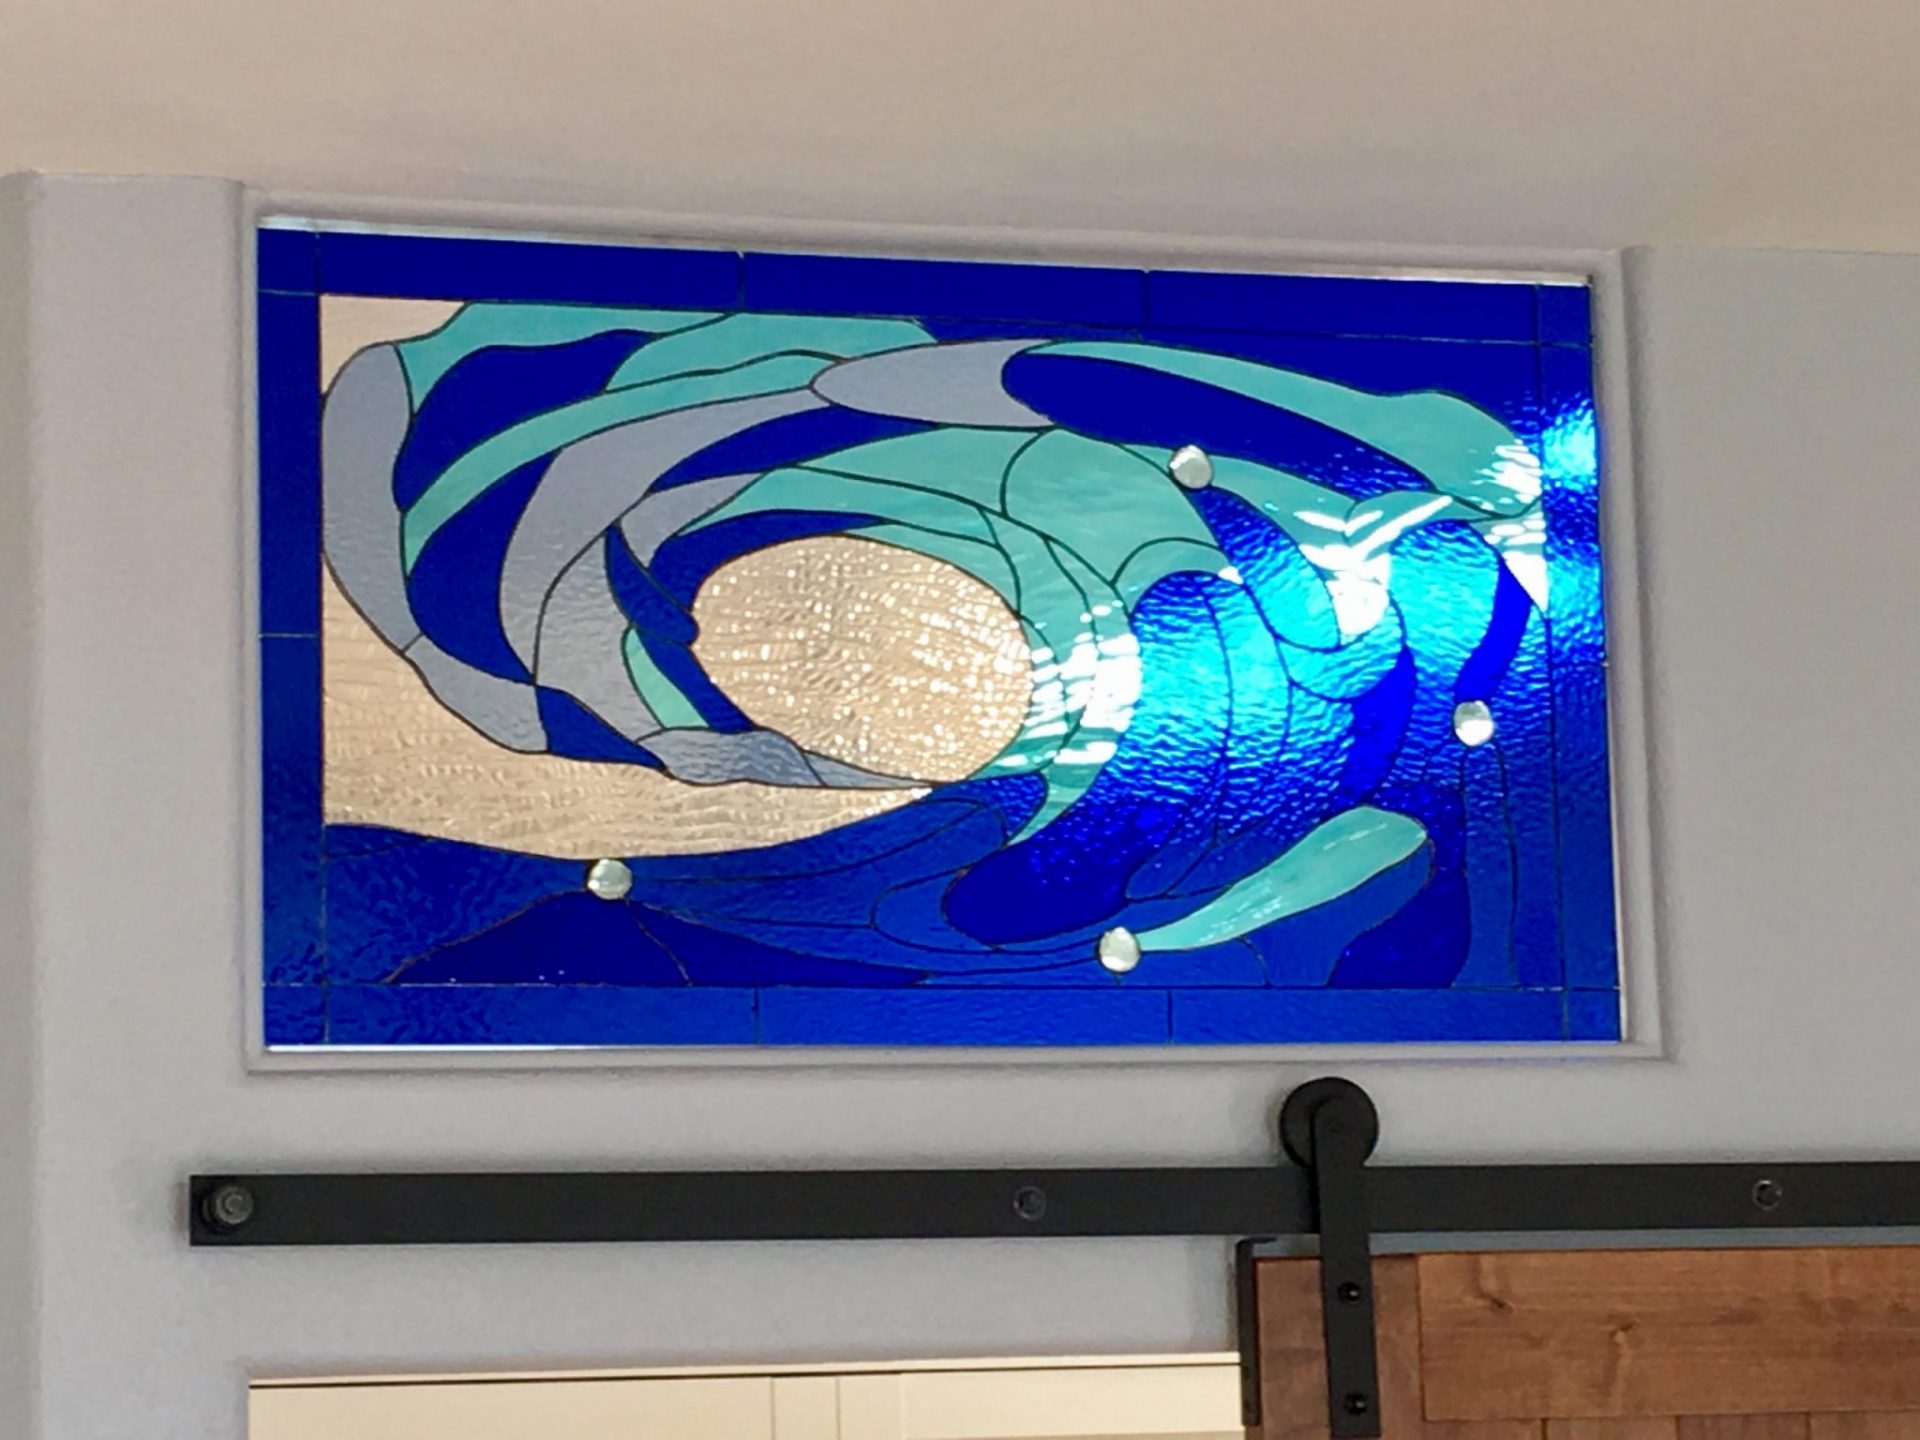 Cresting Wave Stained Glass Insert Installed Above A Sliding Barn Door